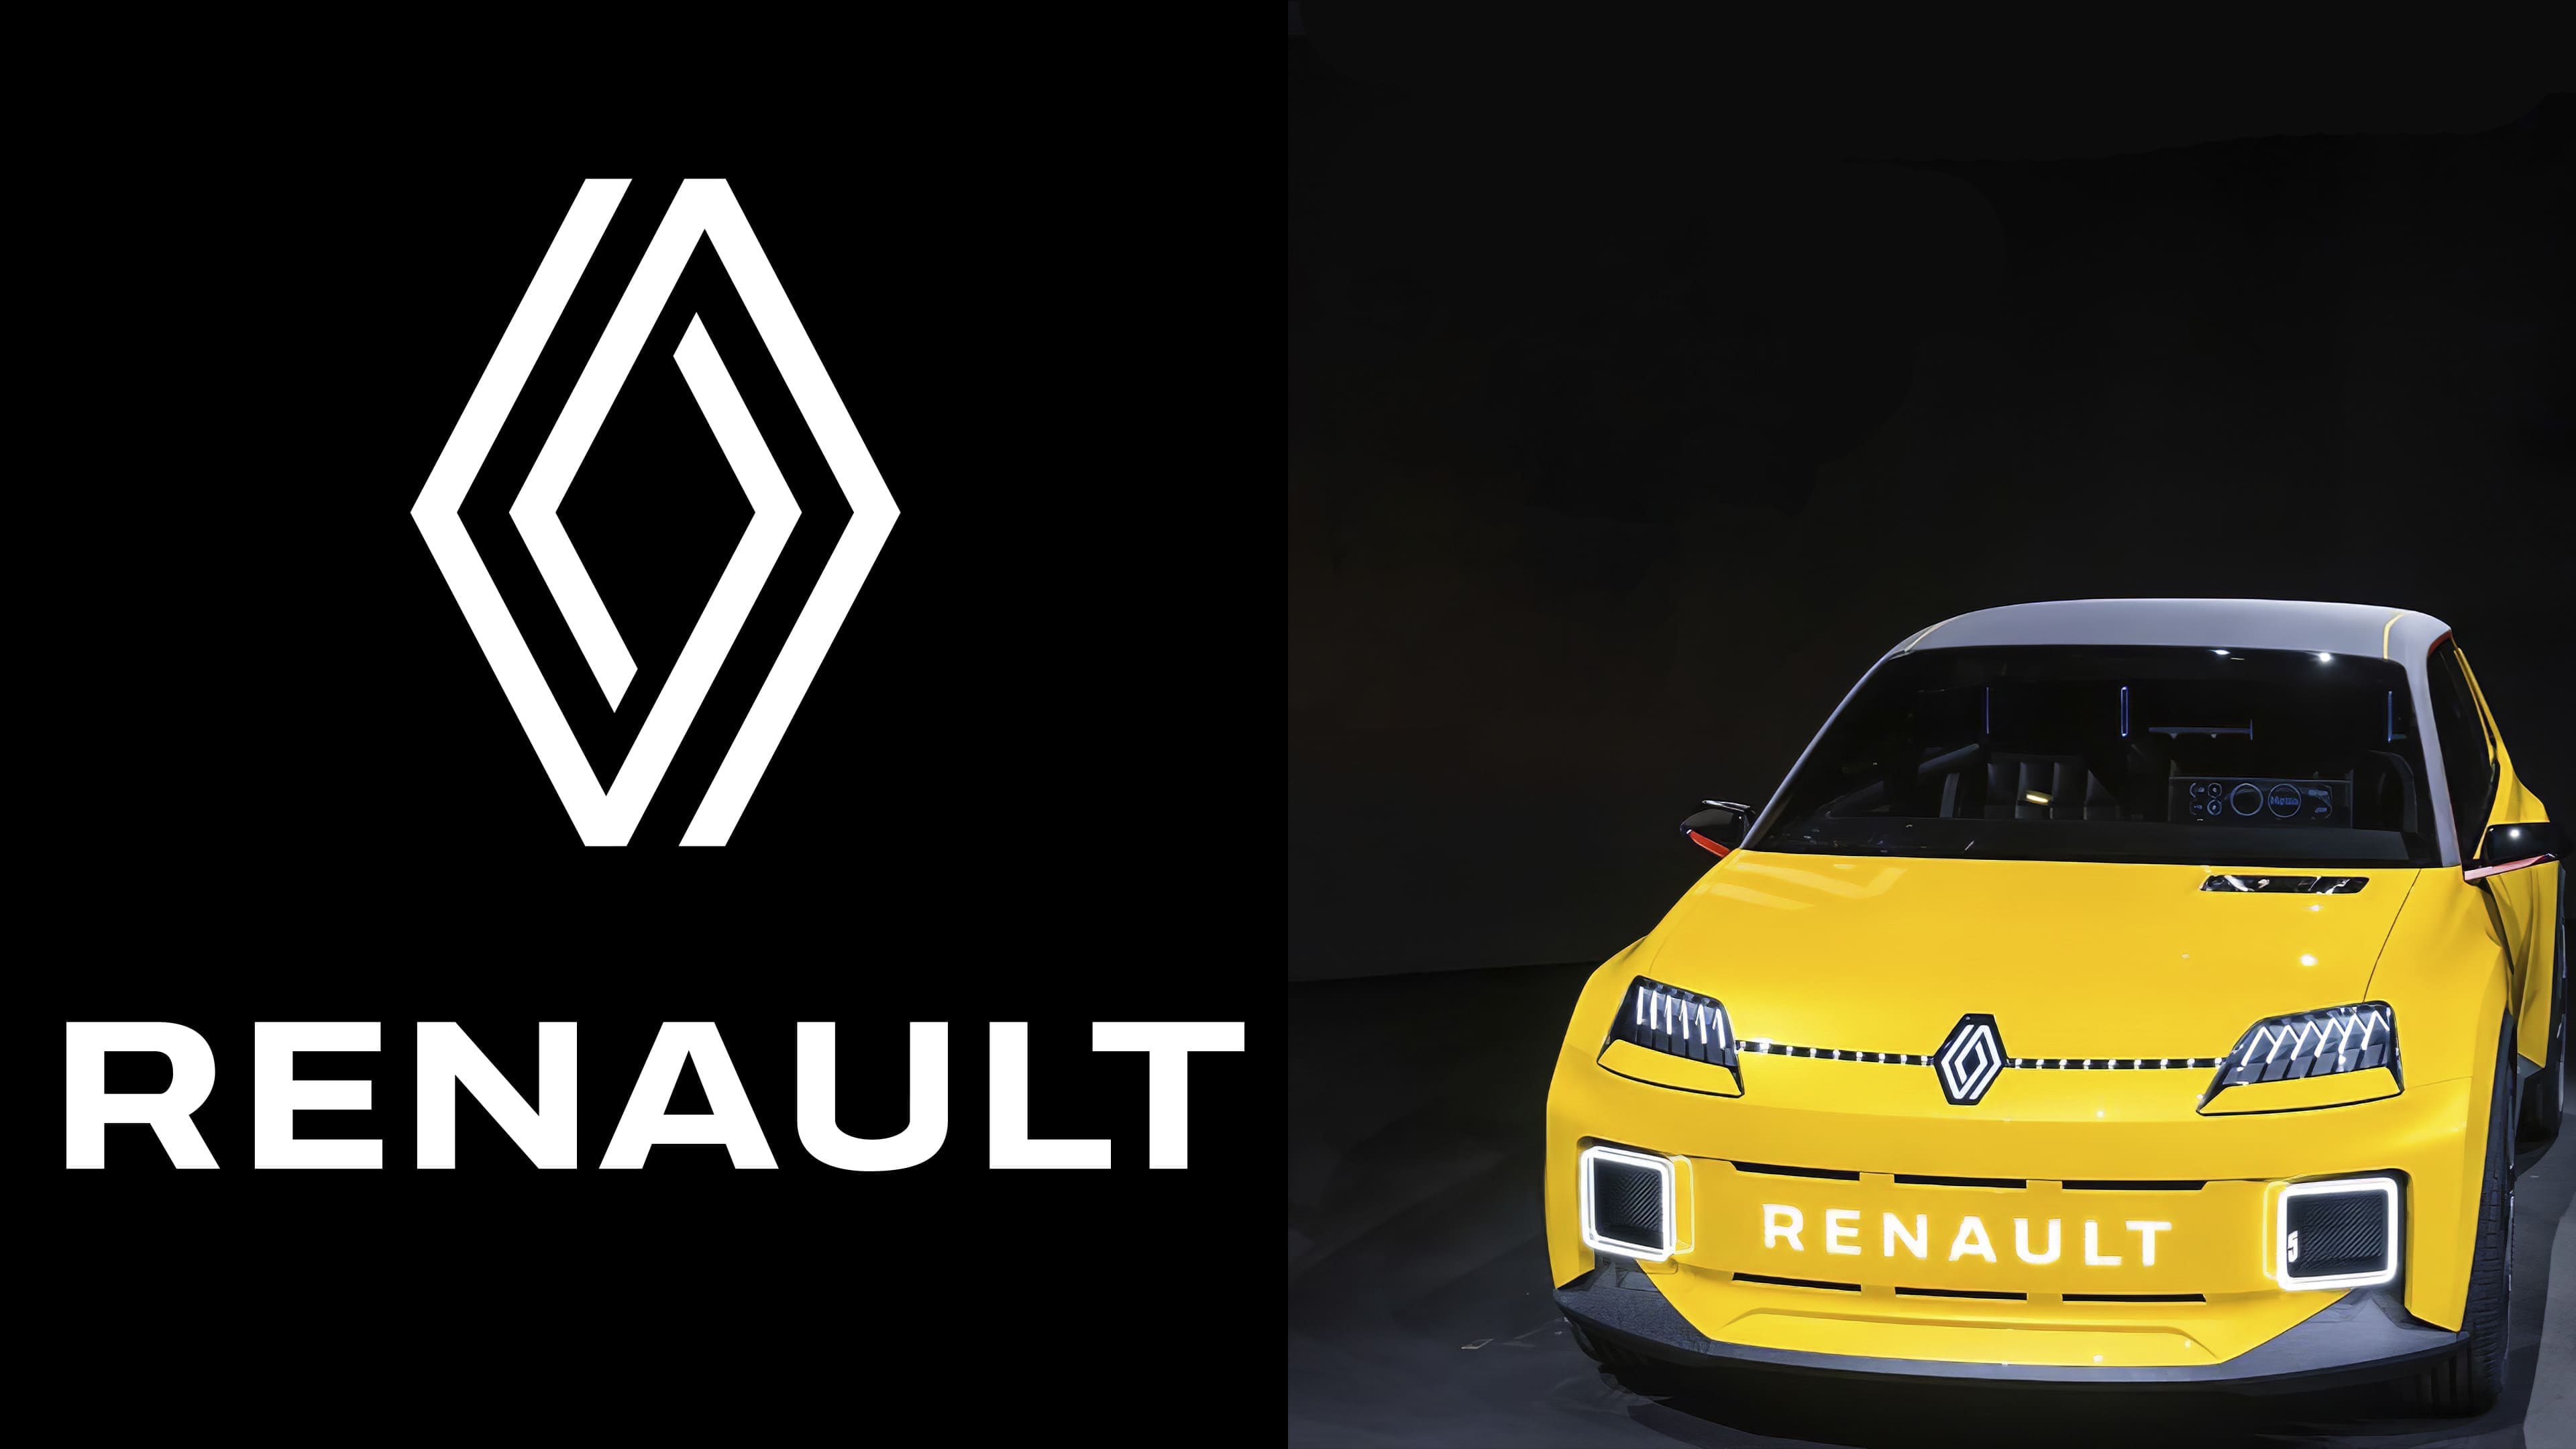 New Renault logo 2021: Hail to the Renaulution concept